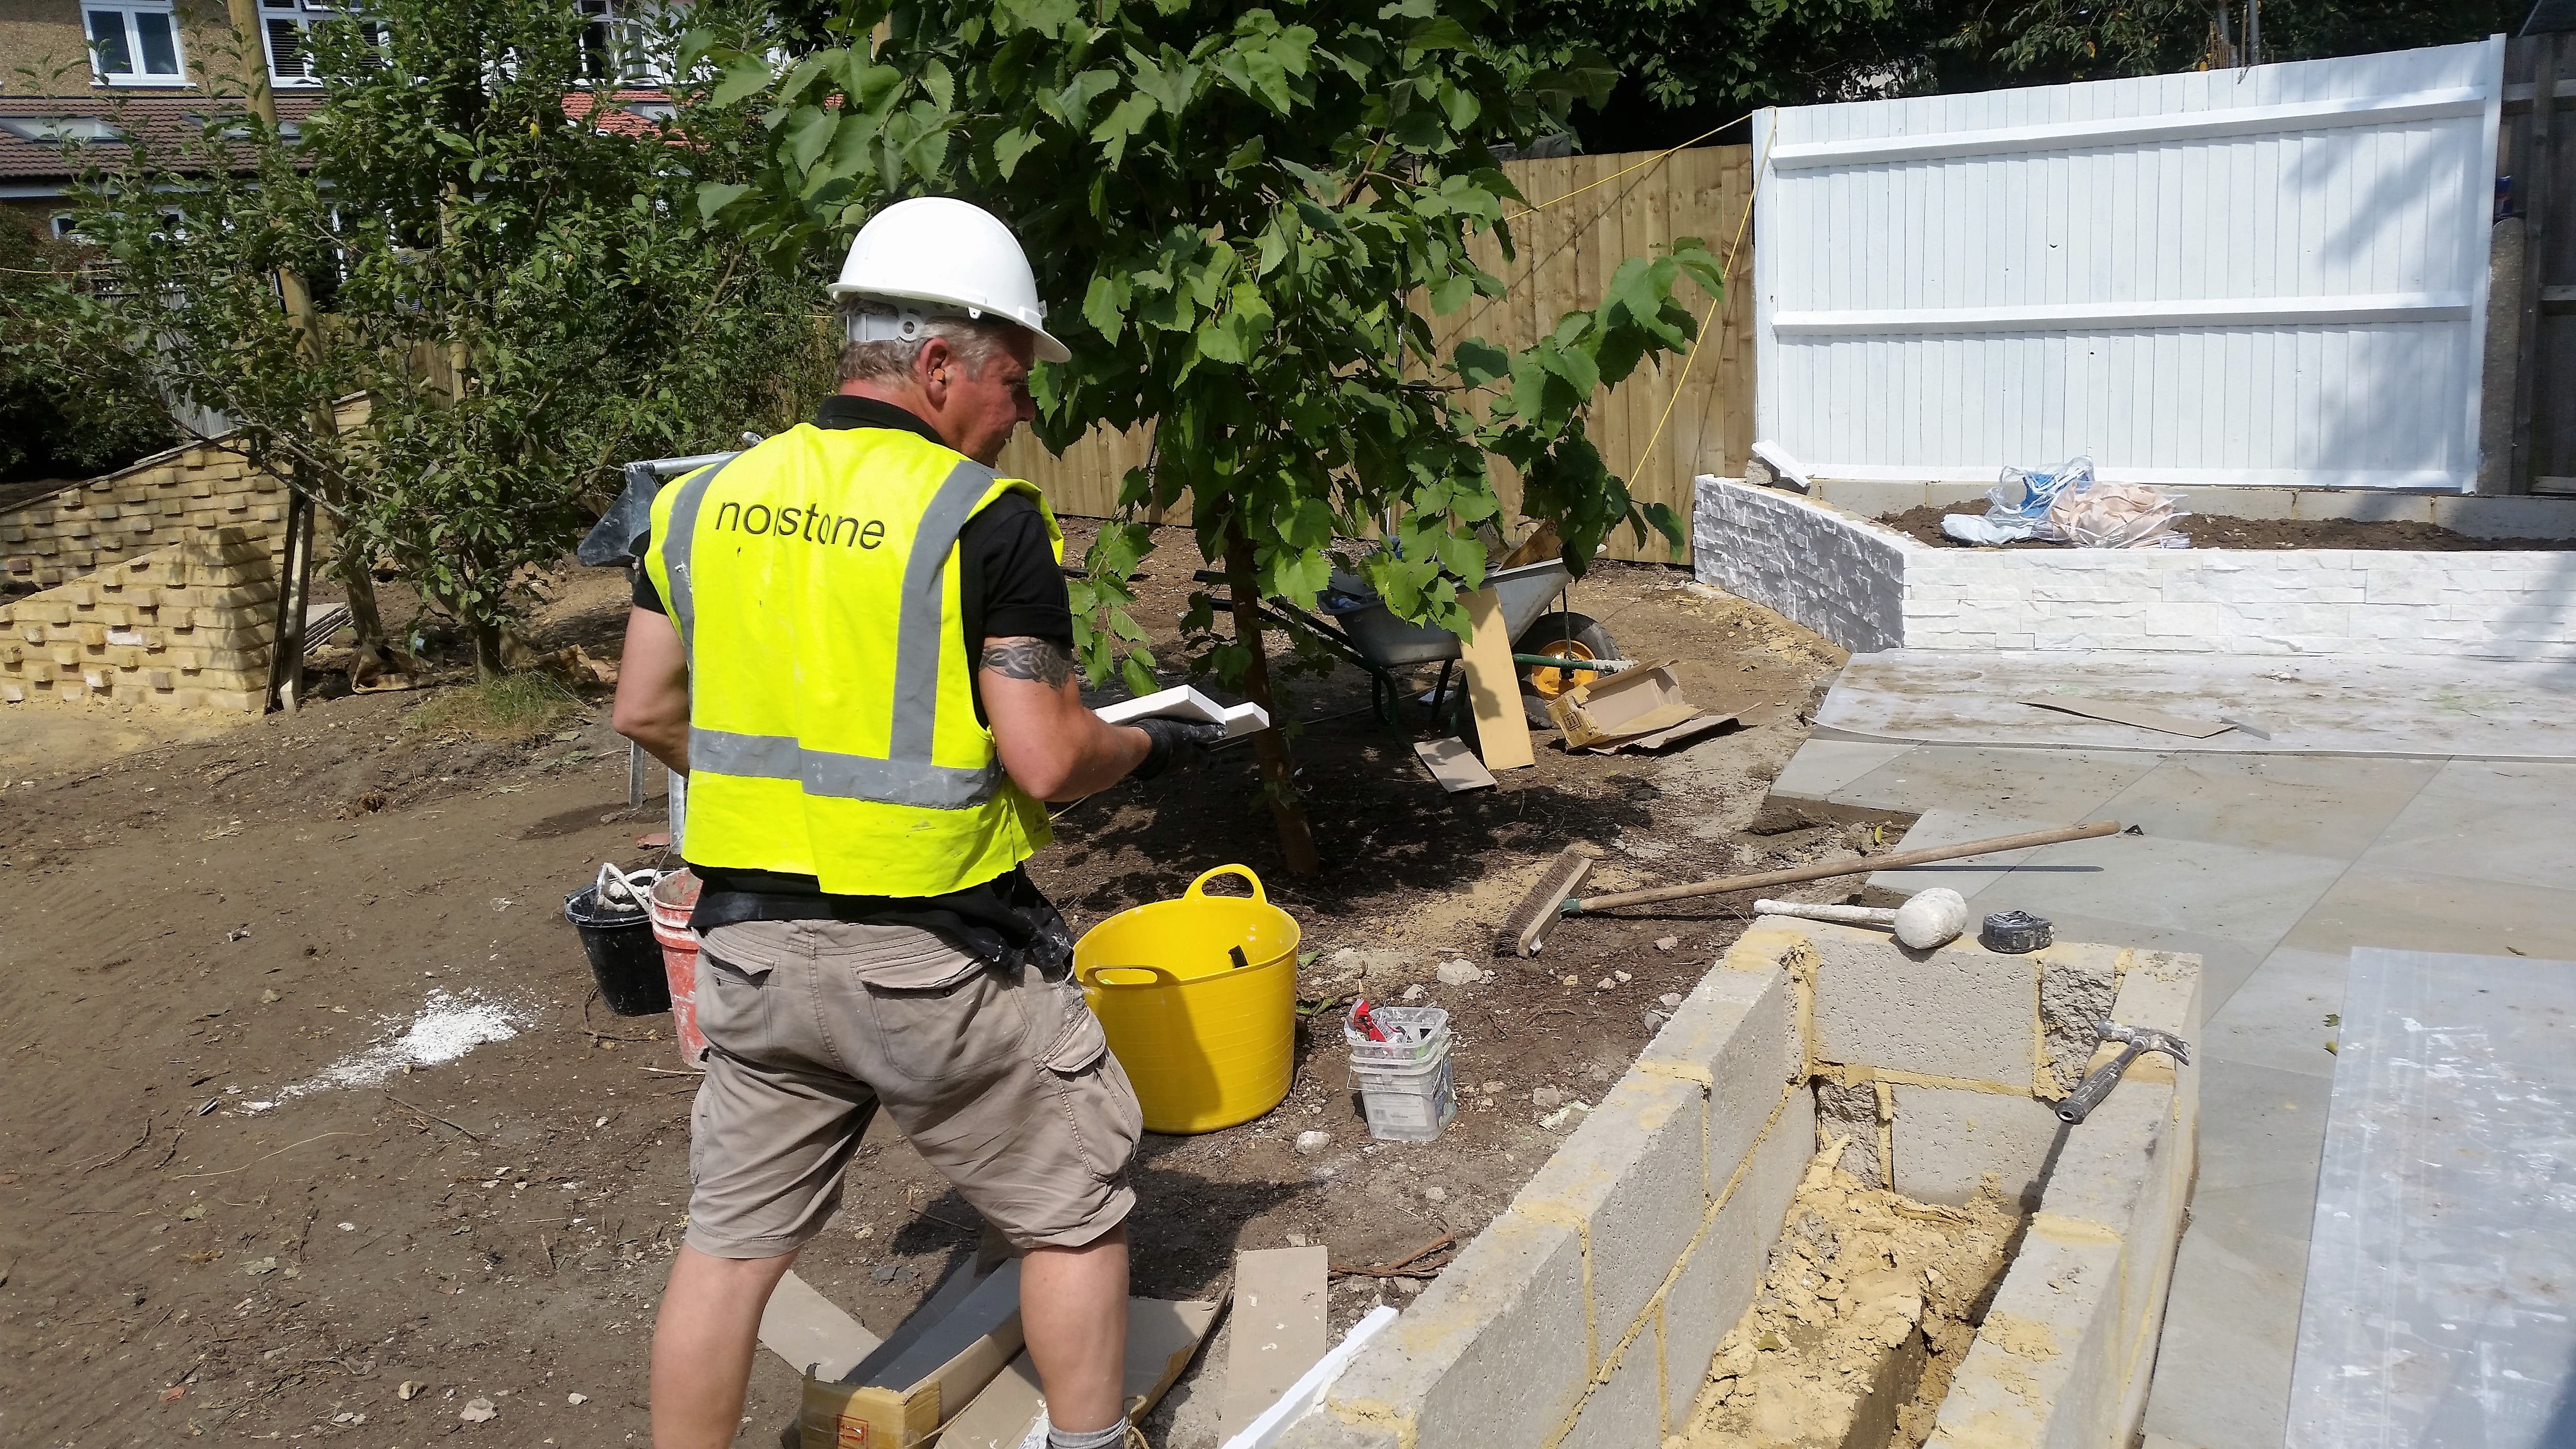 Norstone White Rock Panels being installed on an exterior garden wall and cleaned up post installation without the need for acid.